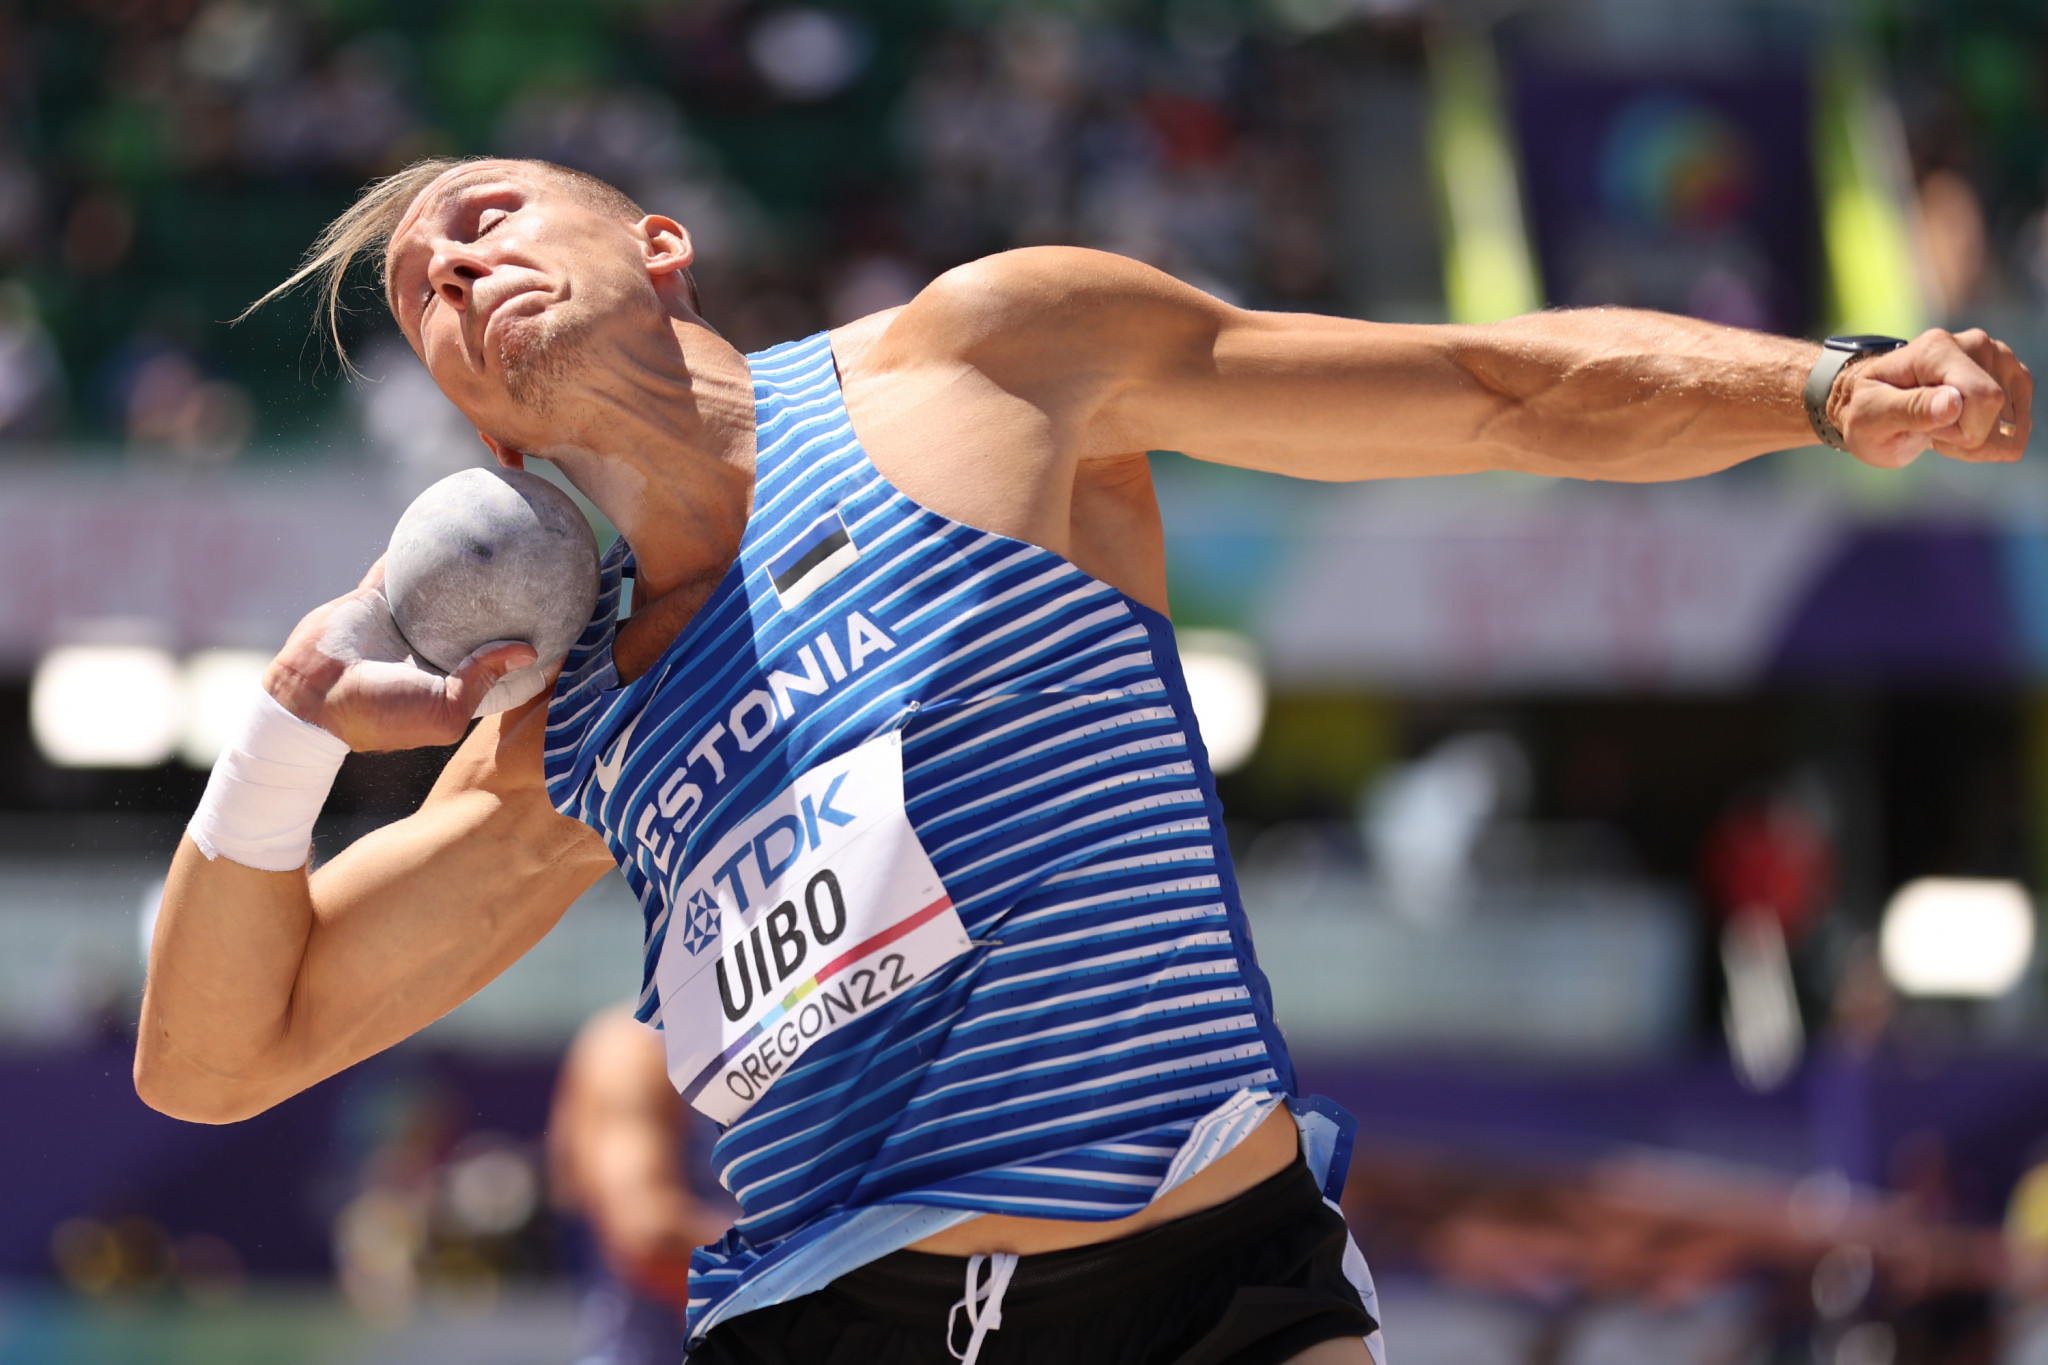 Maicel Uibo of Estonia, husband of women's 400m world champion Shaunae Miller-Uibo, in action in the shot put discipline of the decathlon ©Getty Images 